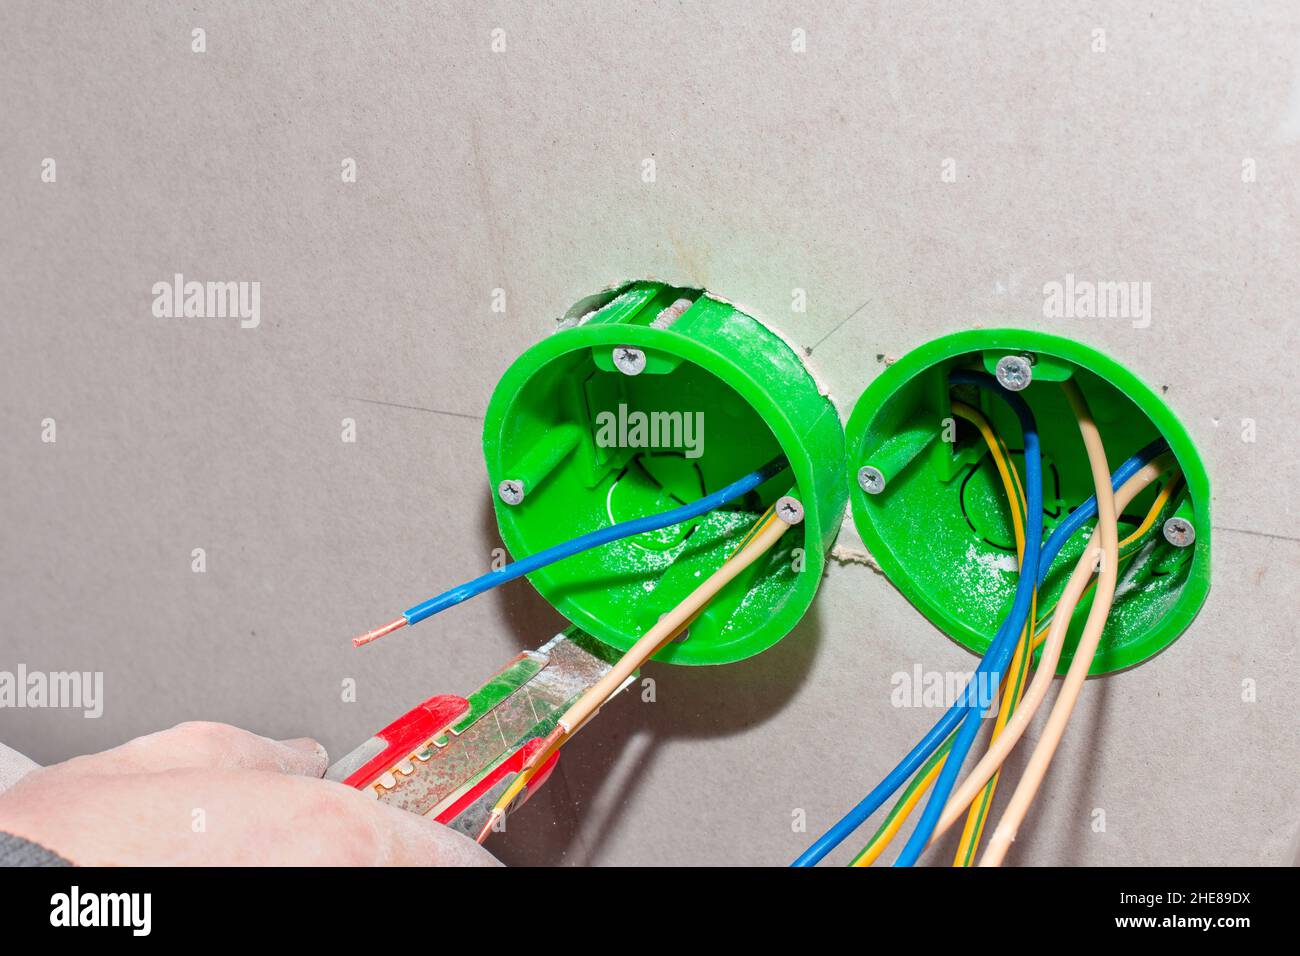 An electrician installs an outlet box into a drywall wall to install an electrical outlet. Home renovation. Stock Photo